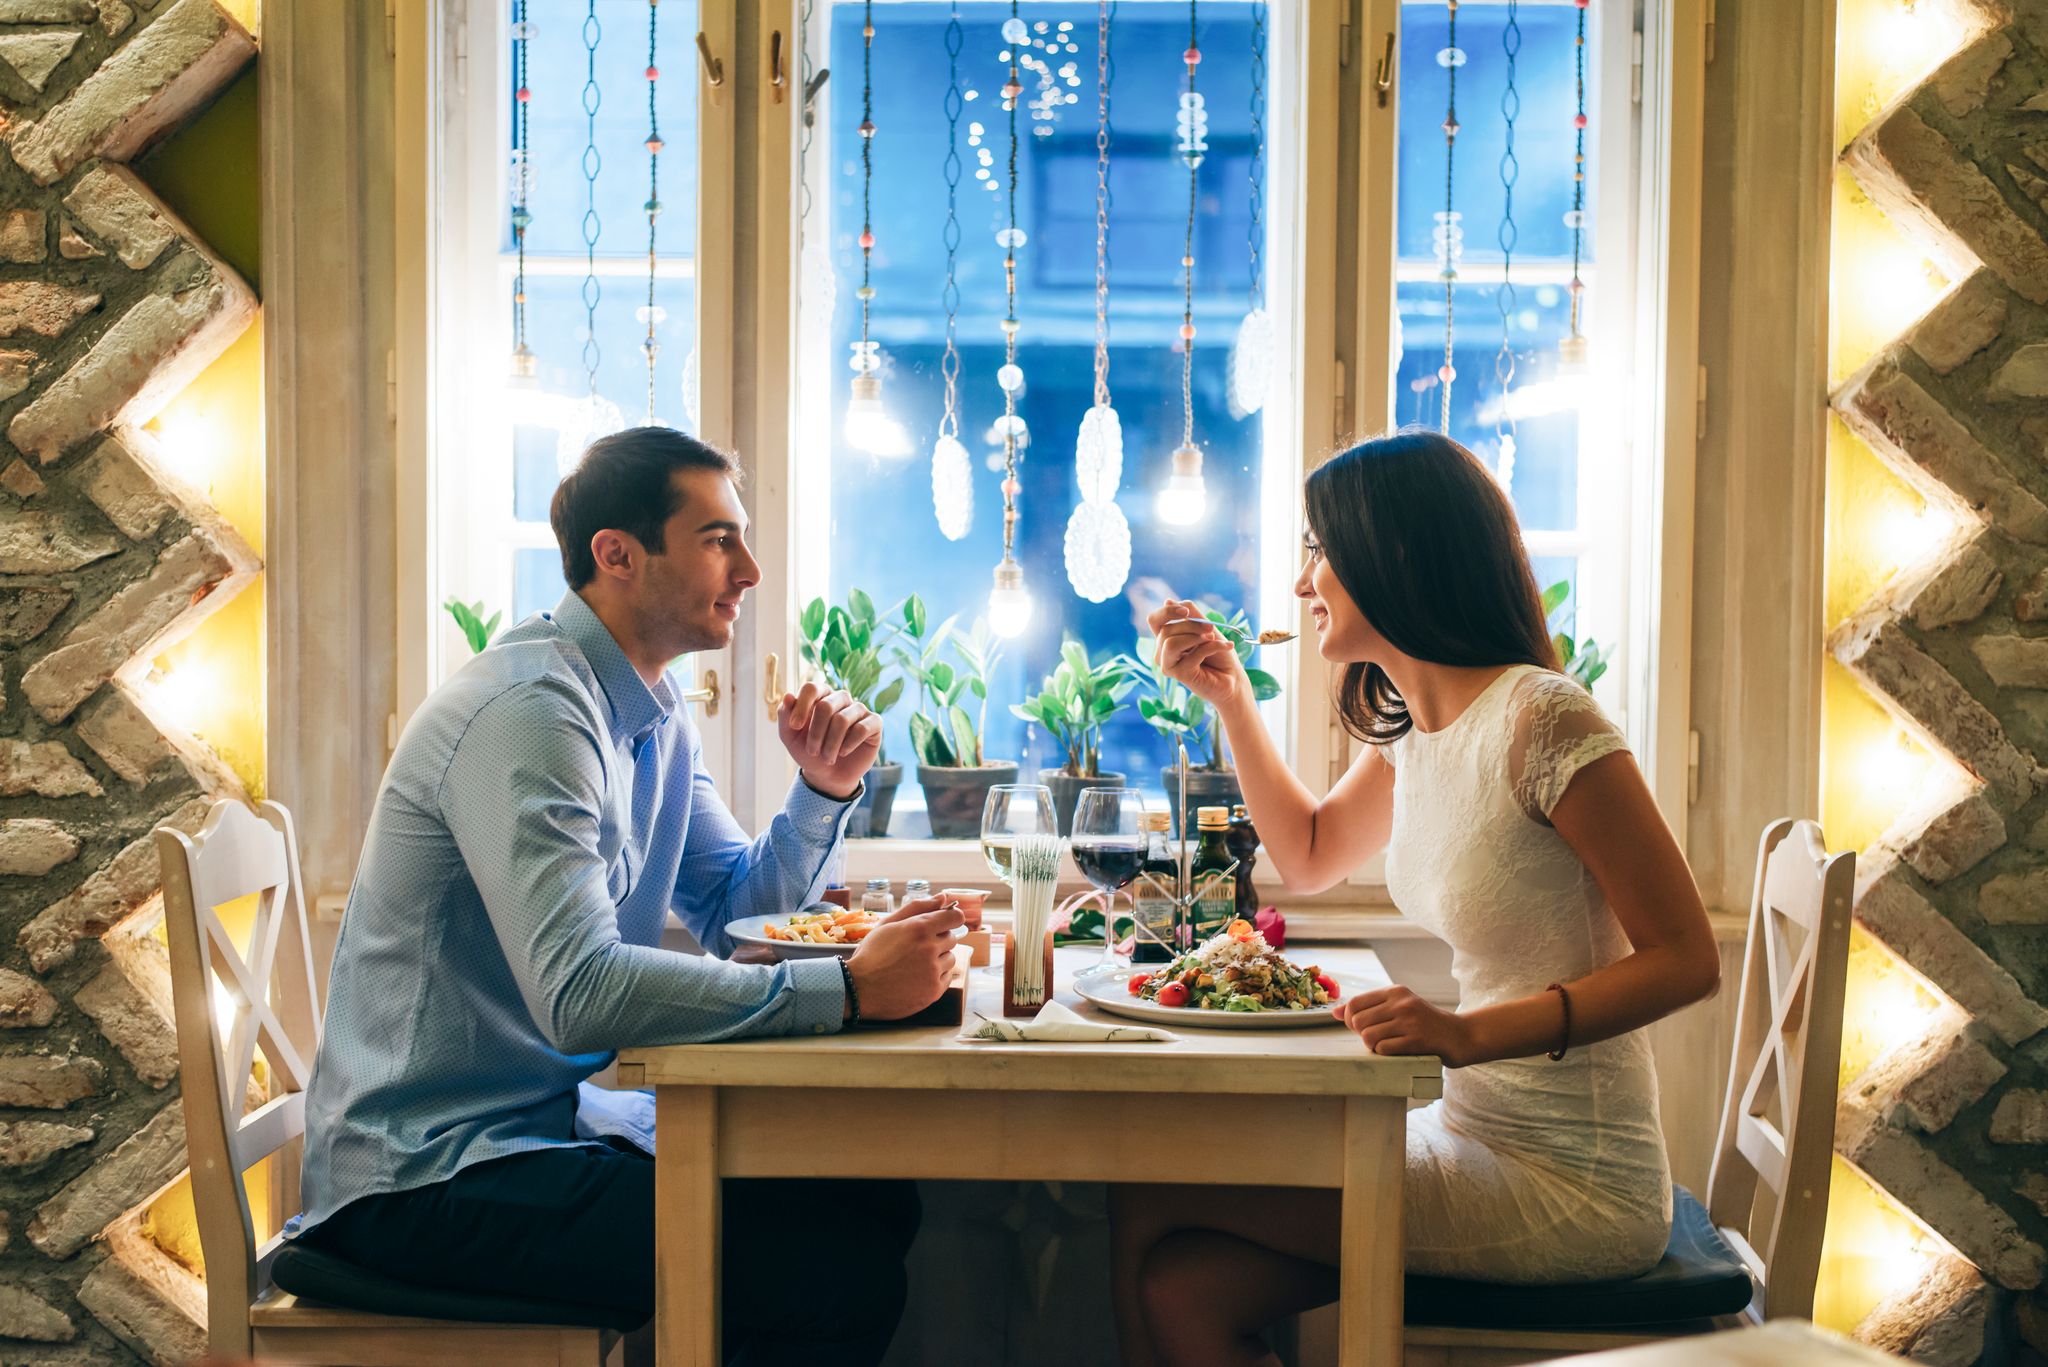 A couple having dinner | Source: Getty Images